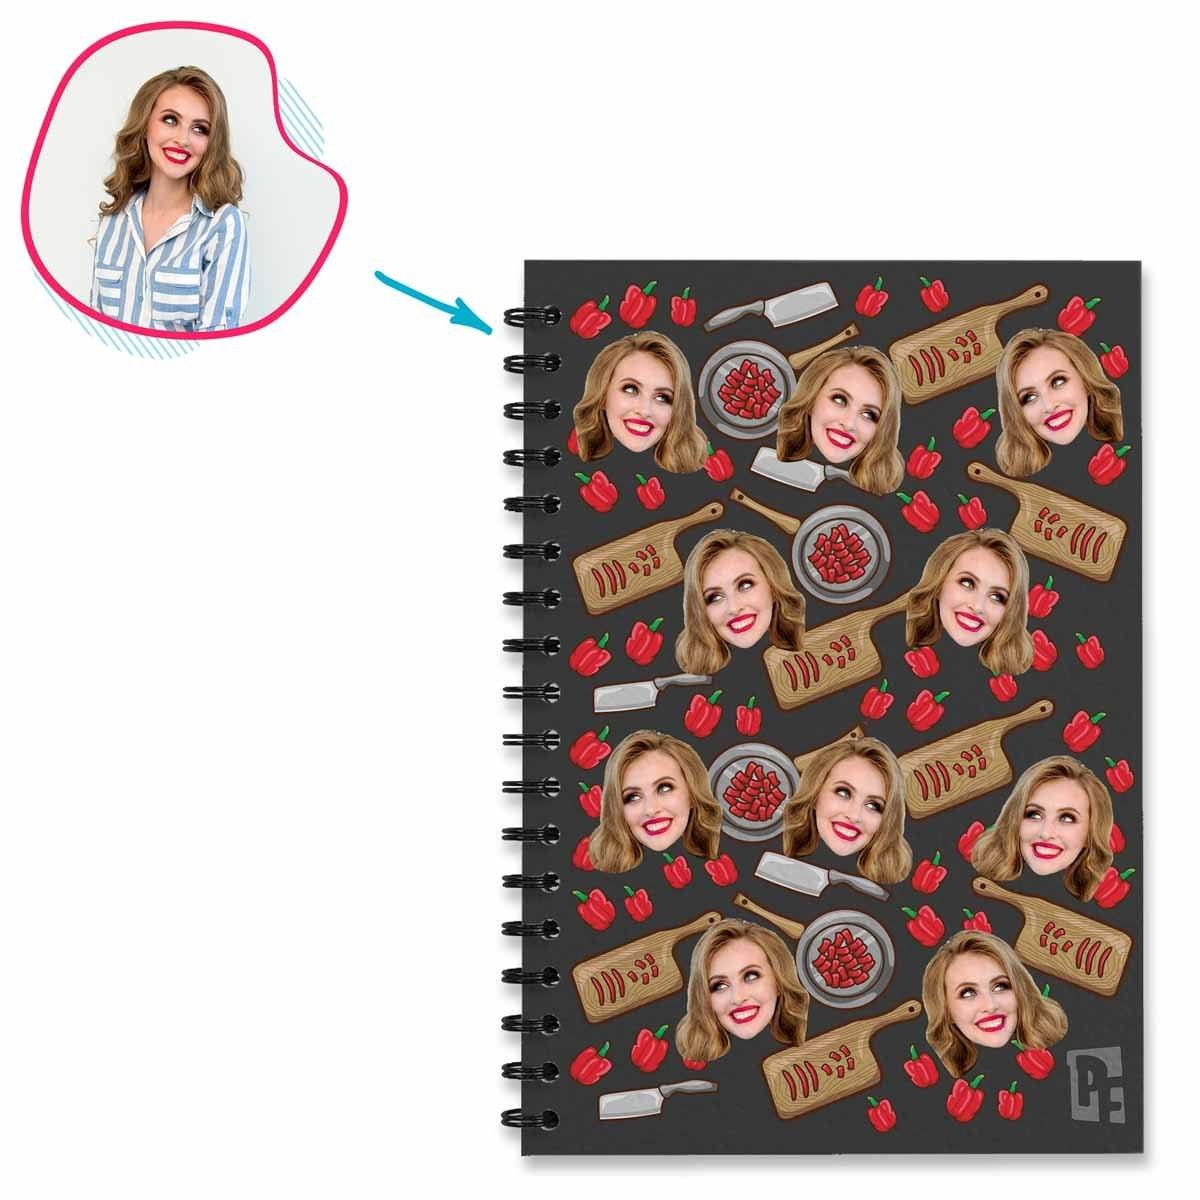 dark Сooking Notebook personalized with photo of face printed on them